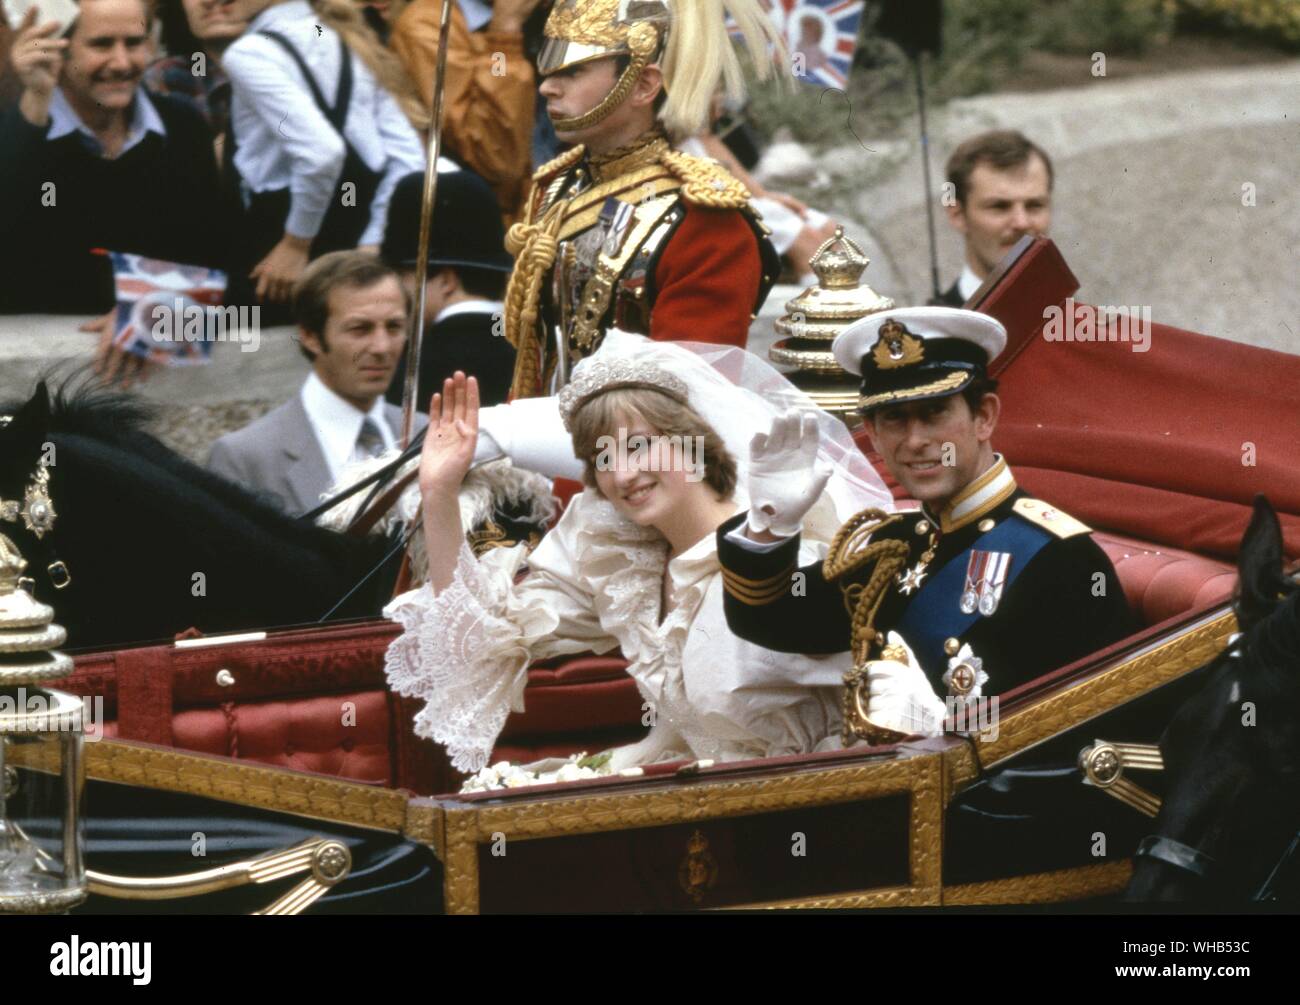 Wedding of the Prince and Princess of Wales (Lady Diana Spencer) 29 July 1981. Stock Photo